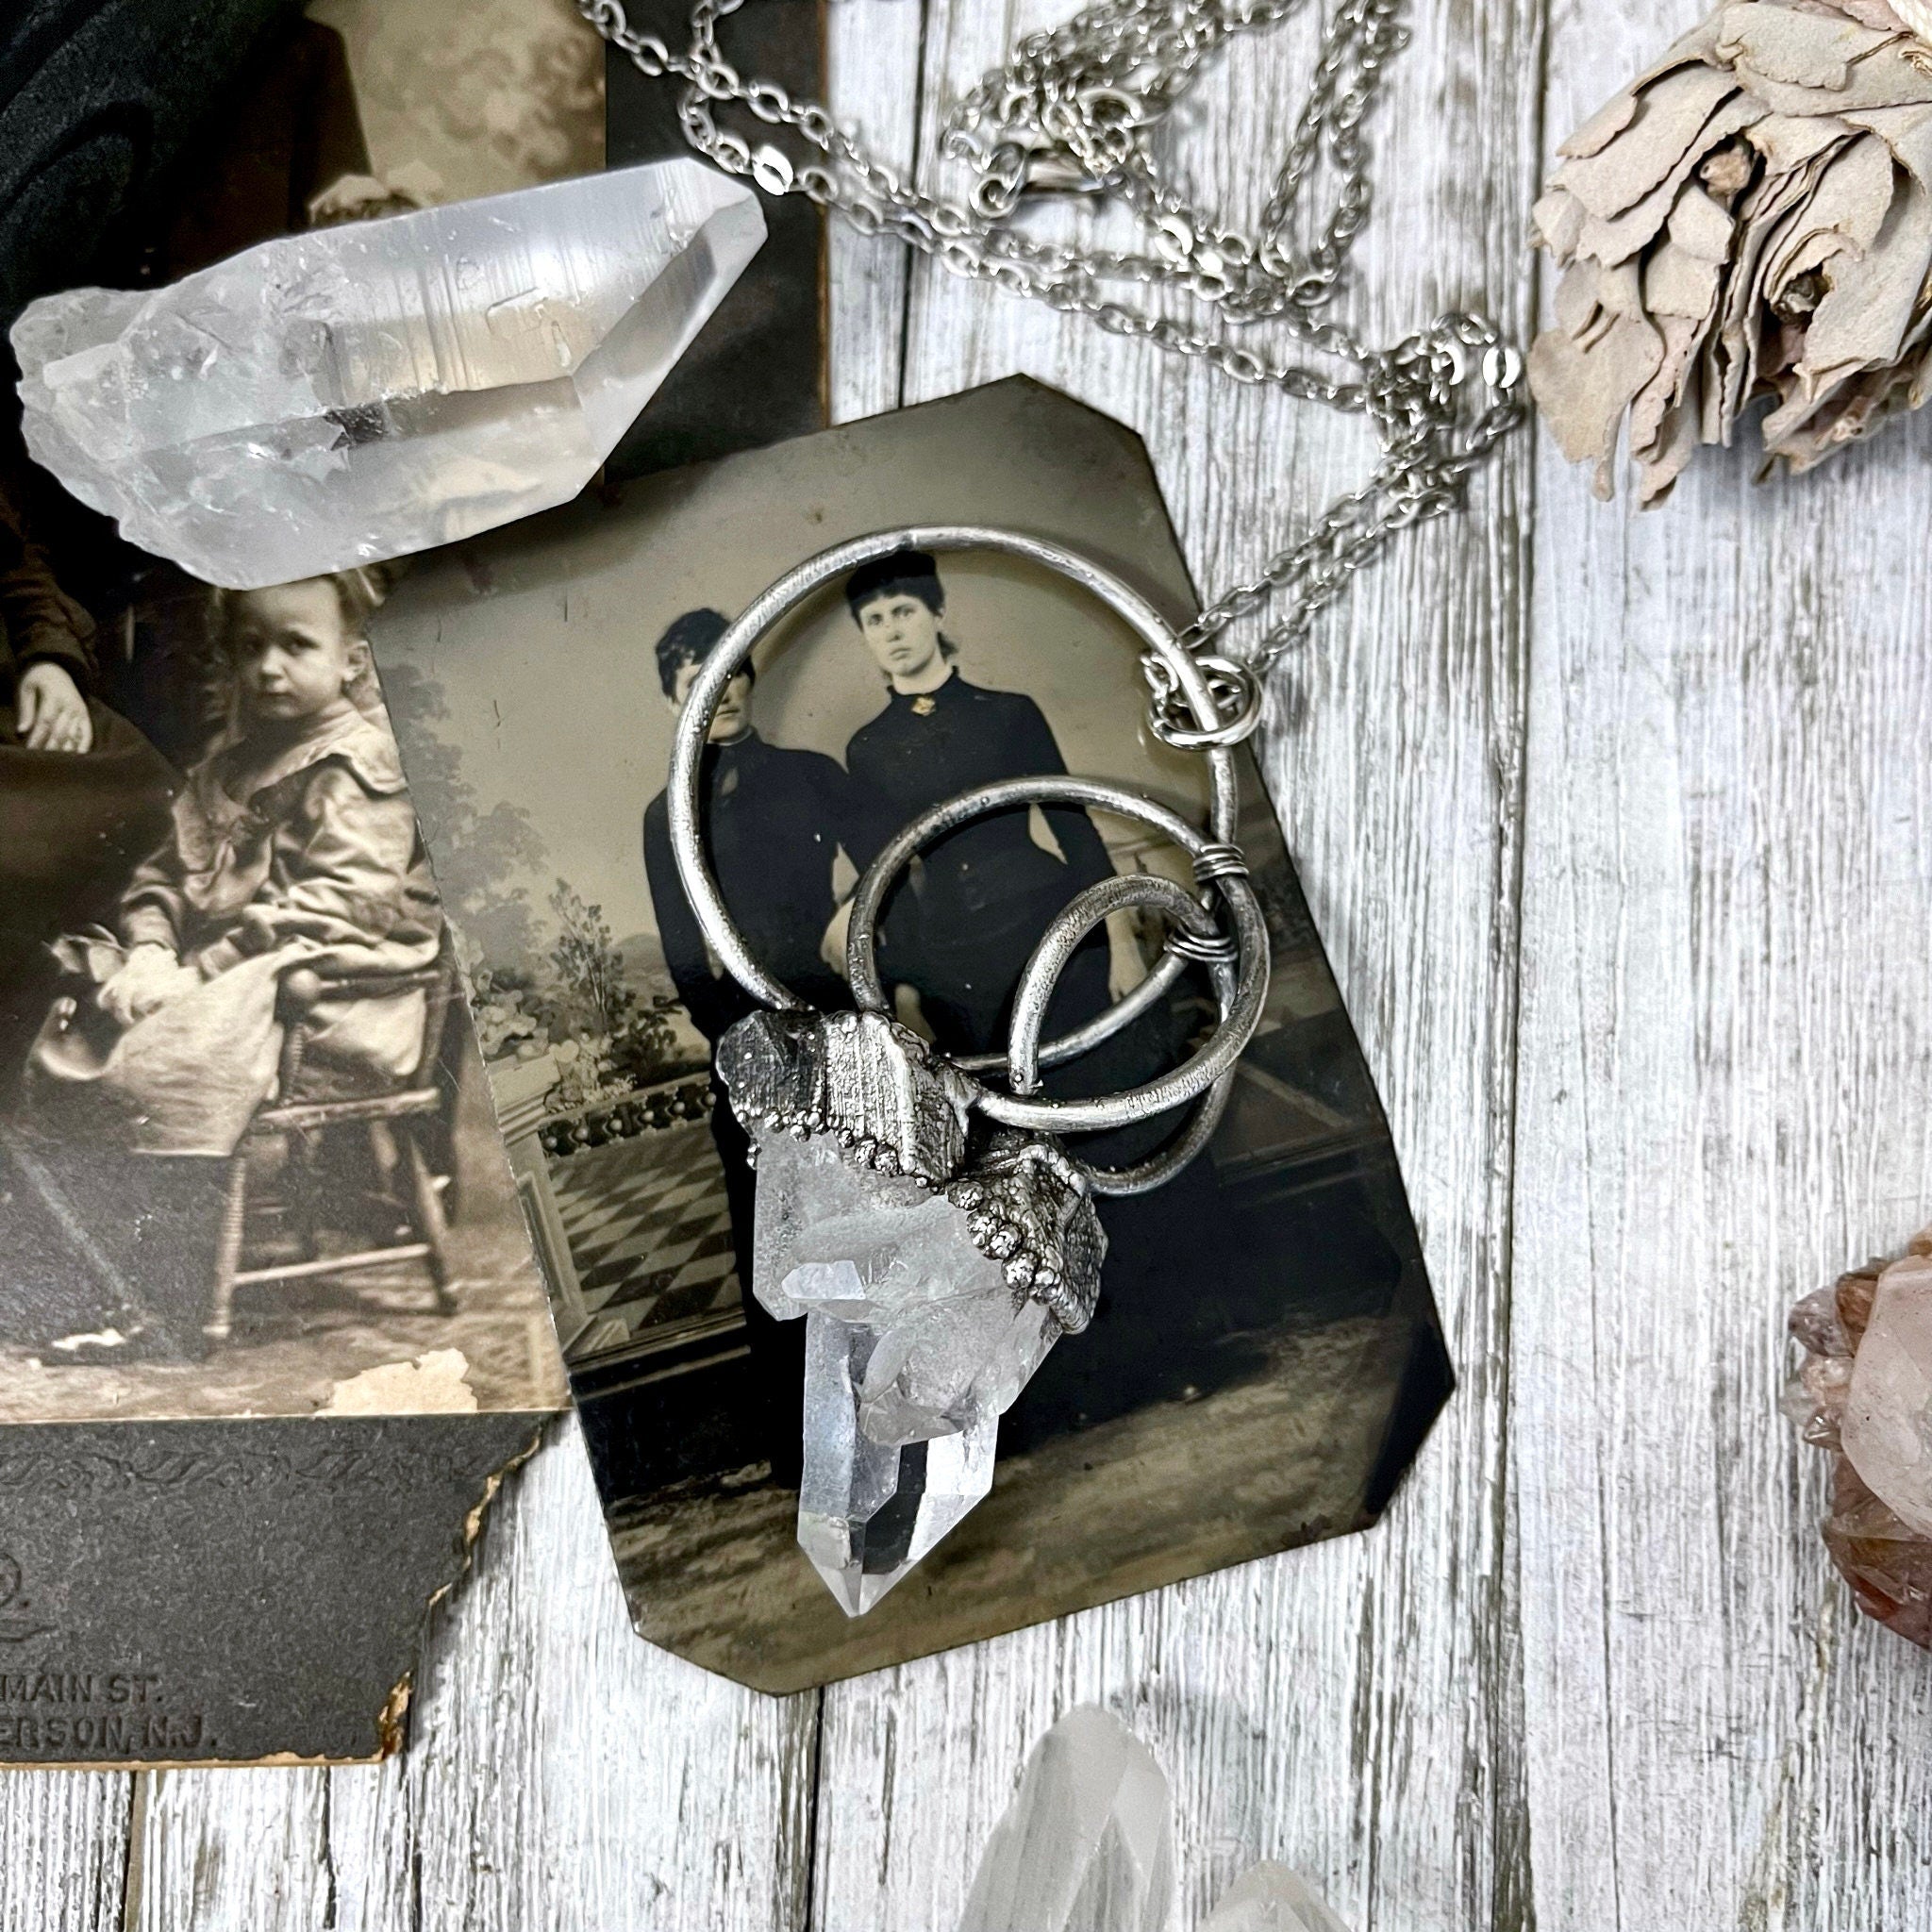 Raw Clear Quartz Crystal Necklace in Fine Silver / Bohemian Jewelry Gift  for her